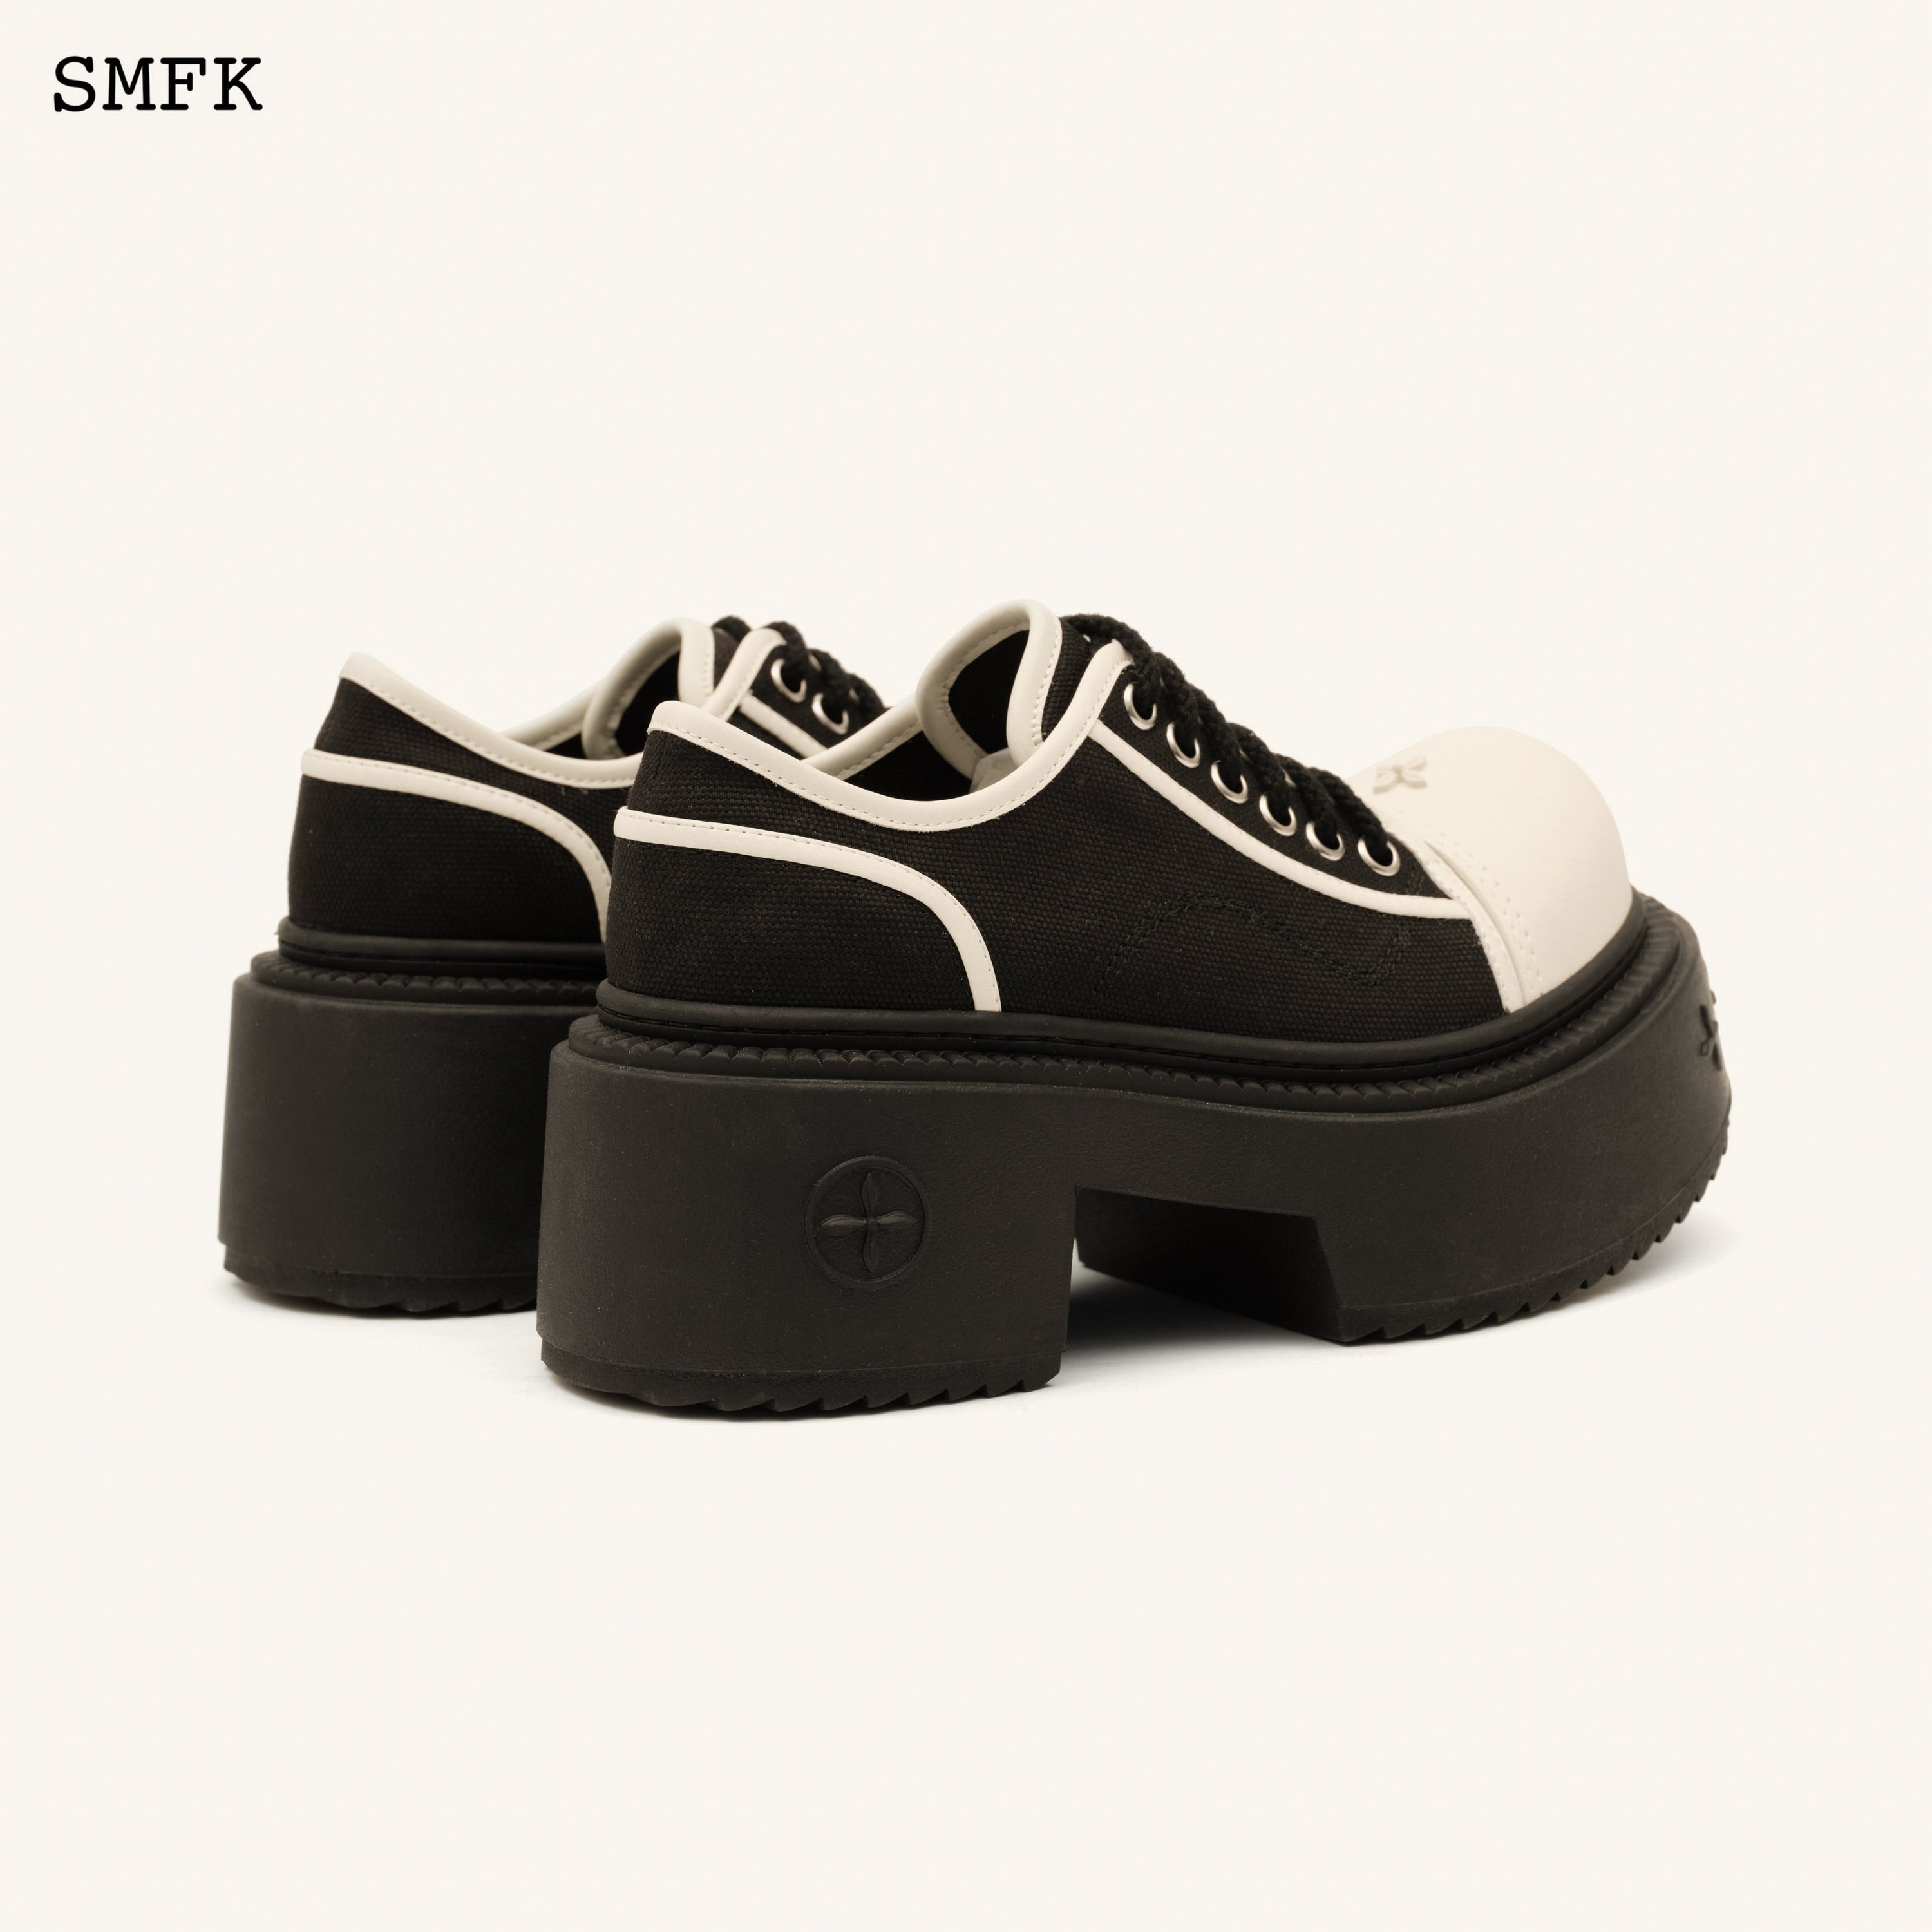 Compass Rider Low-Top Boots In Black And White - SMFK Official